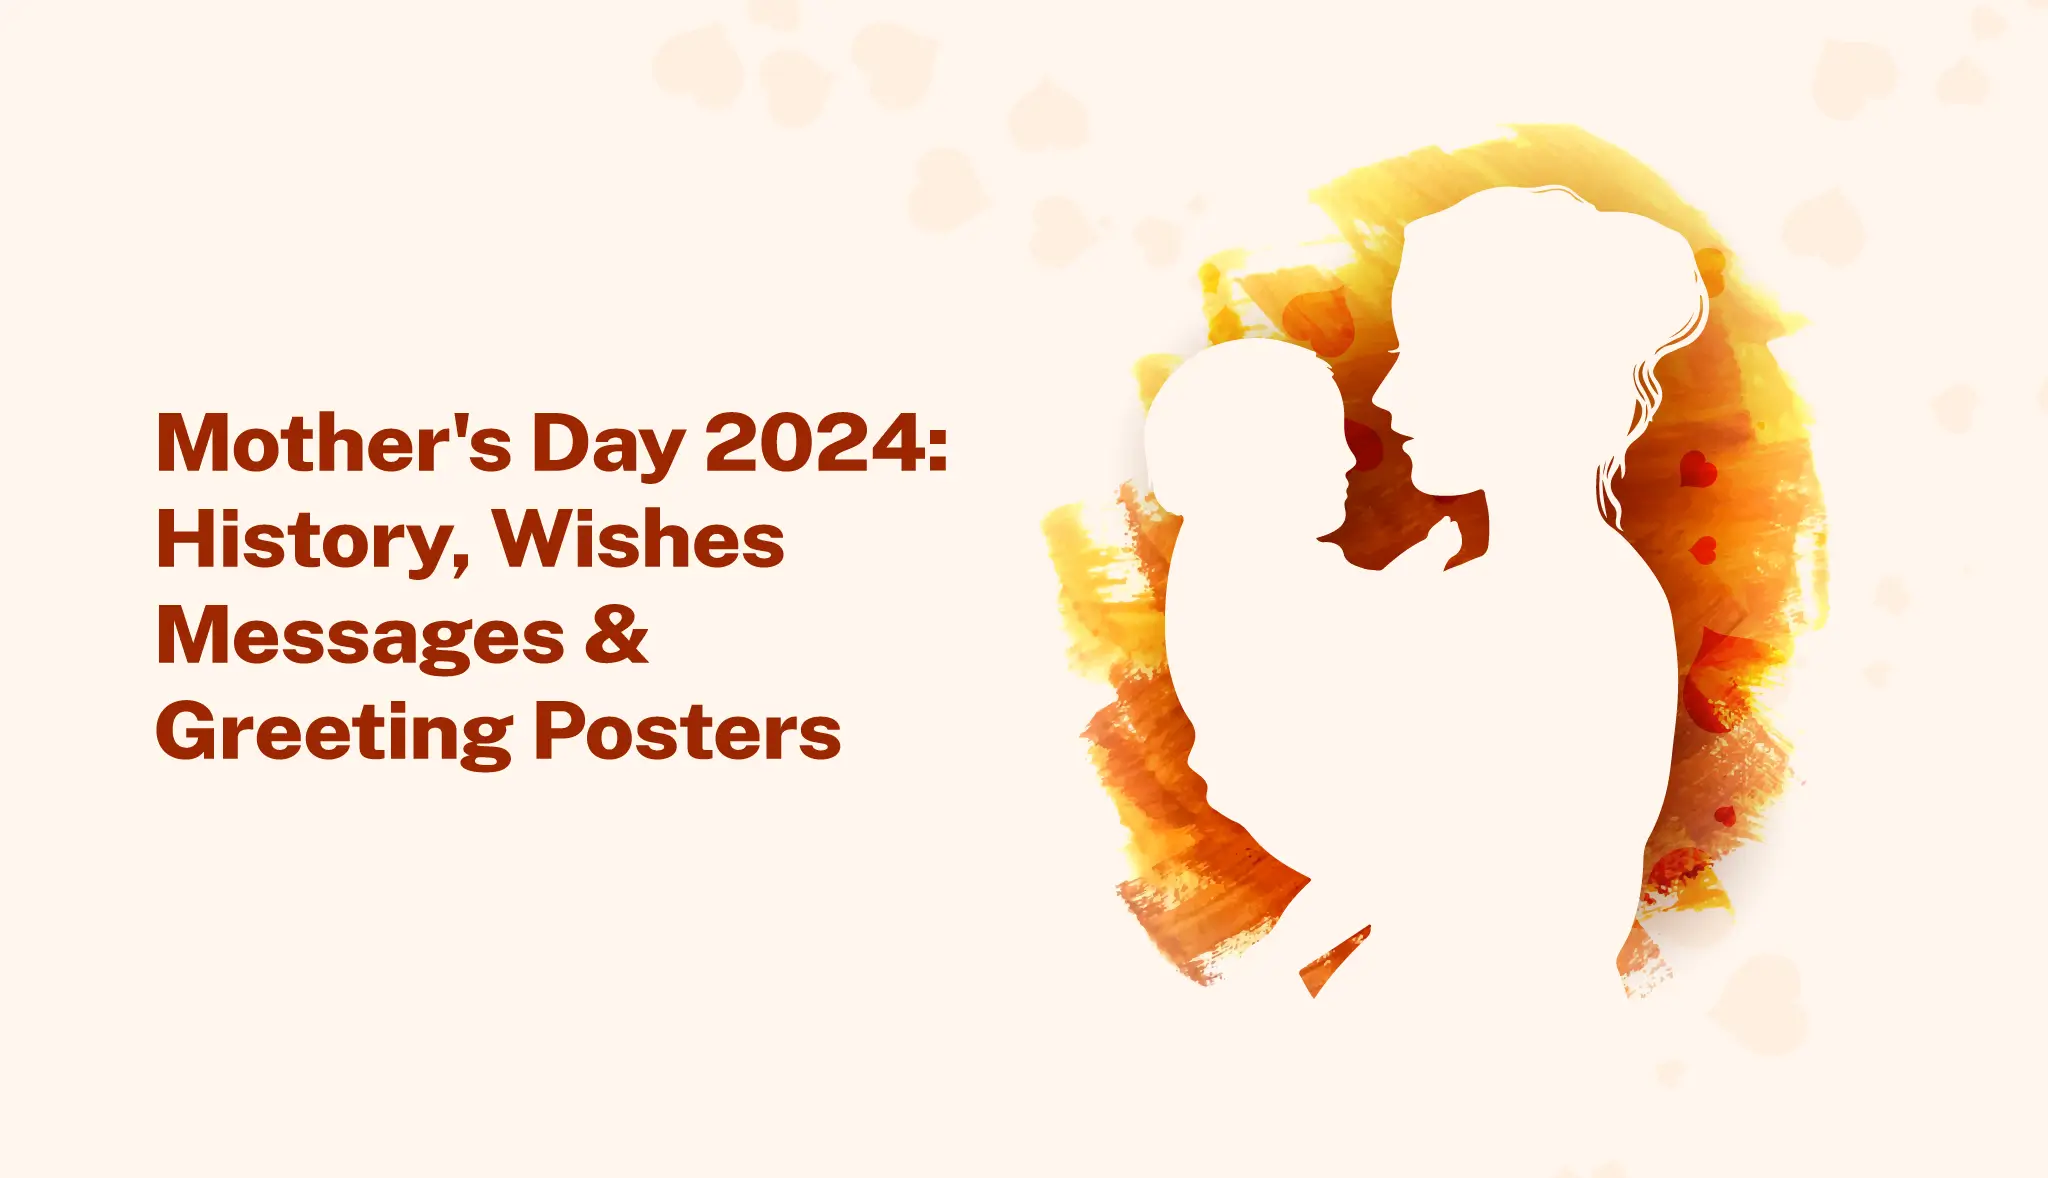 Mother's Day 2024: History, Wishes, Messages & Greeting Posters